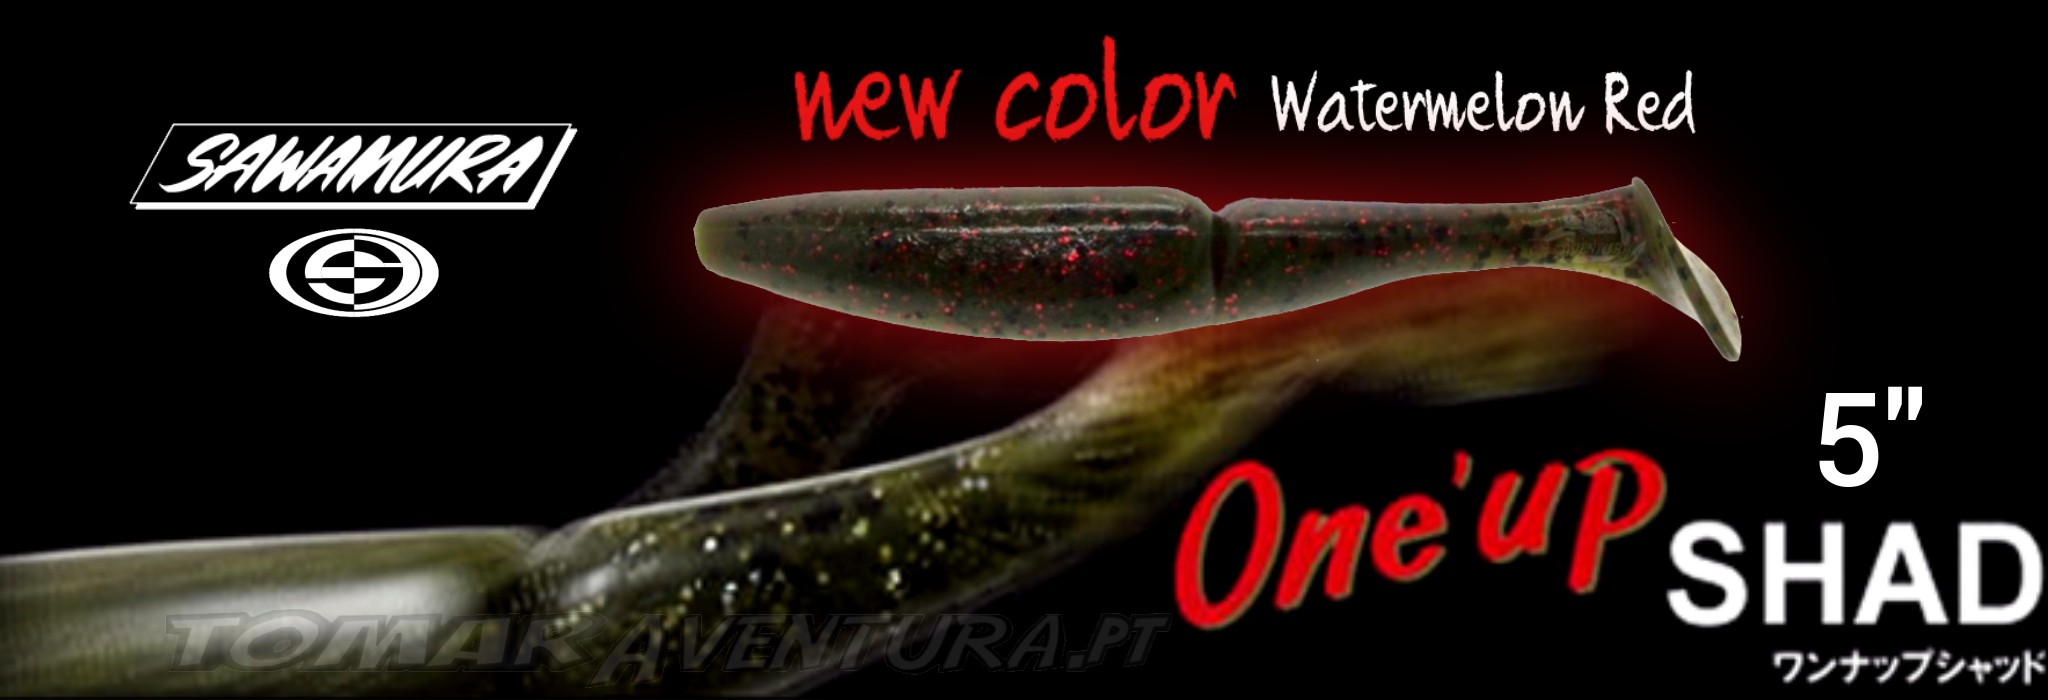 SAWAMURA ONE´UP SHAD 5" WATERMELON RED